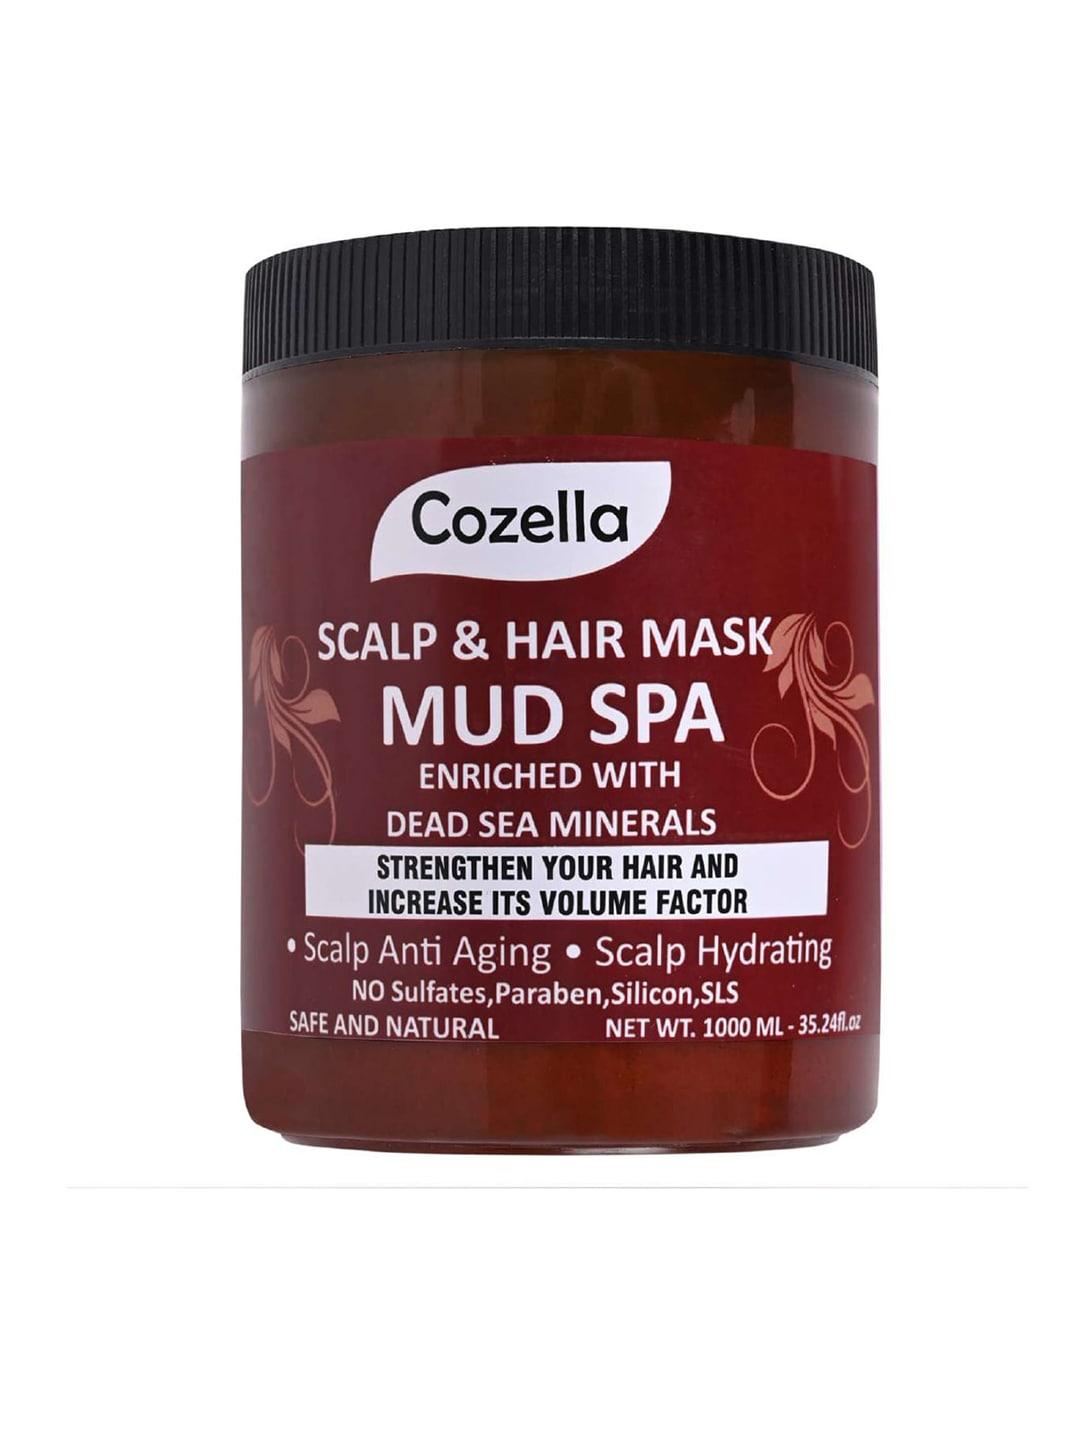 cozella safe & natural mud spa scalp & hair mask with dead sea minerals - 1000 ml